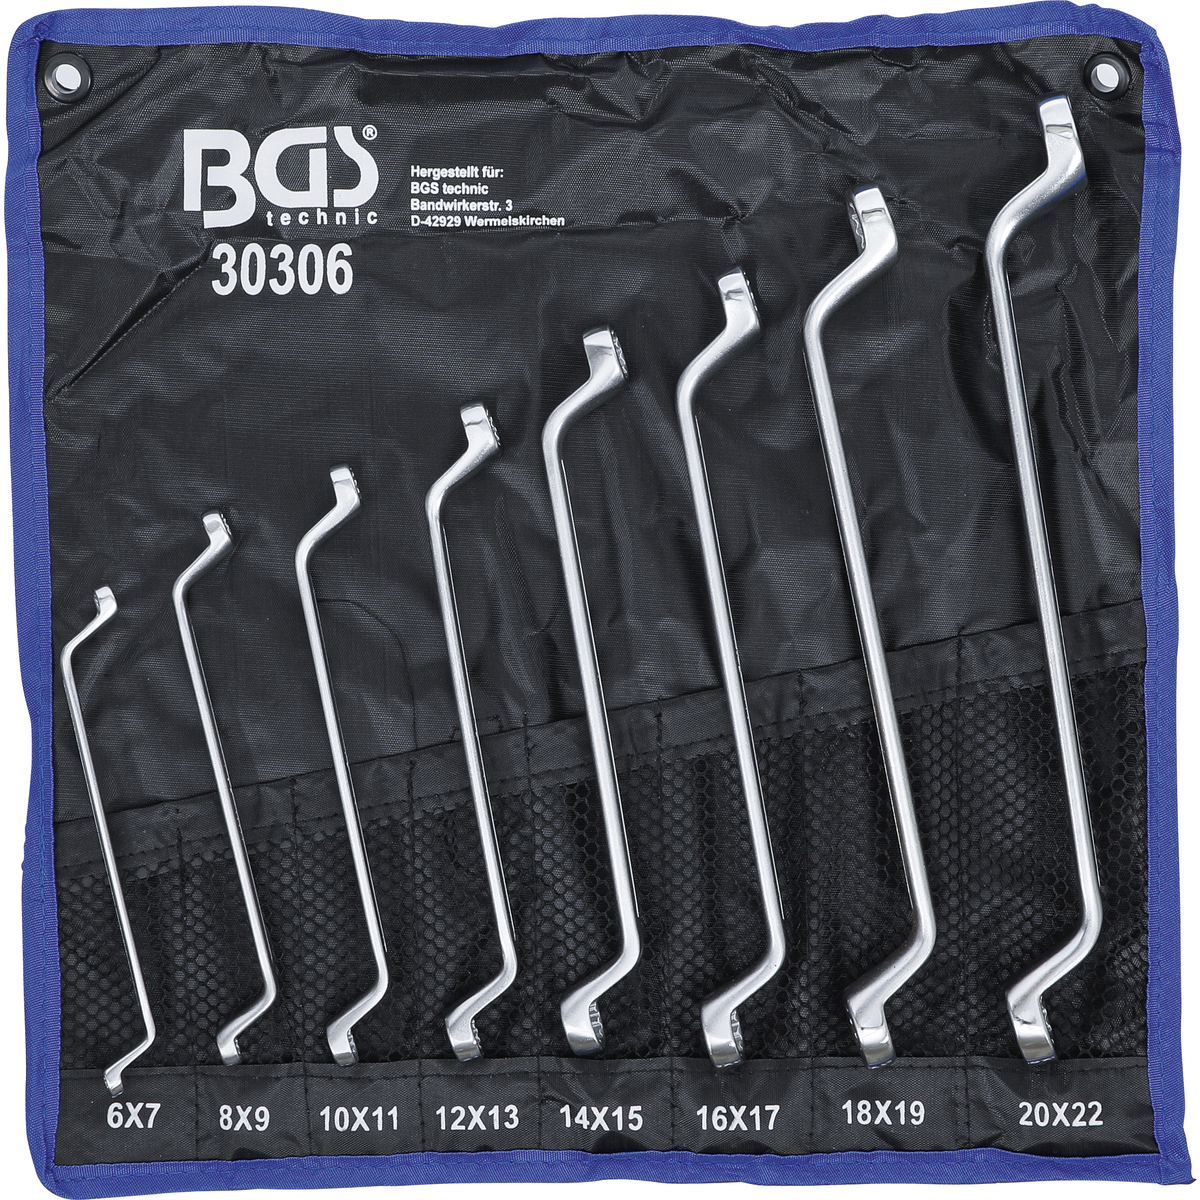 BGS 1186-10x11 Double Ring Spanner 10 x 11 mm extra long